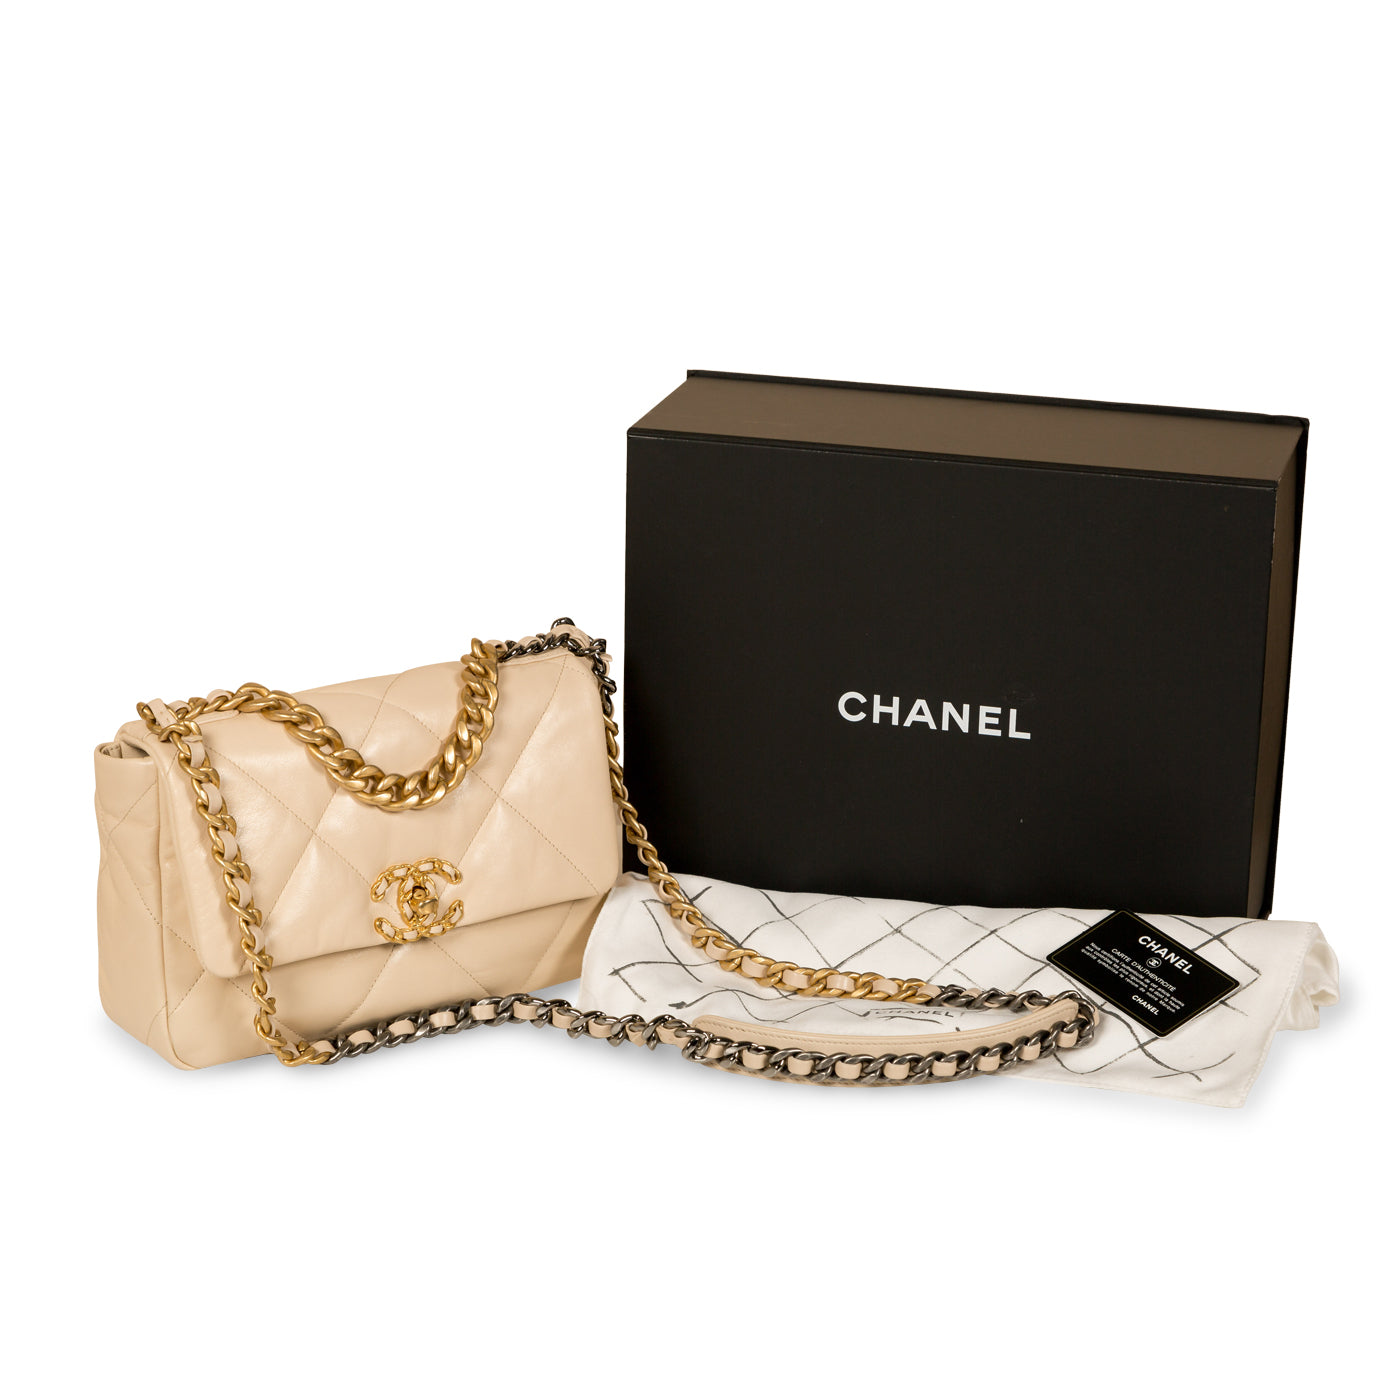 Chanel - Chanel 19 Flap Bag - Small - Beige